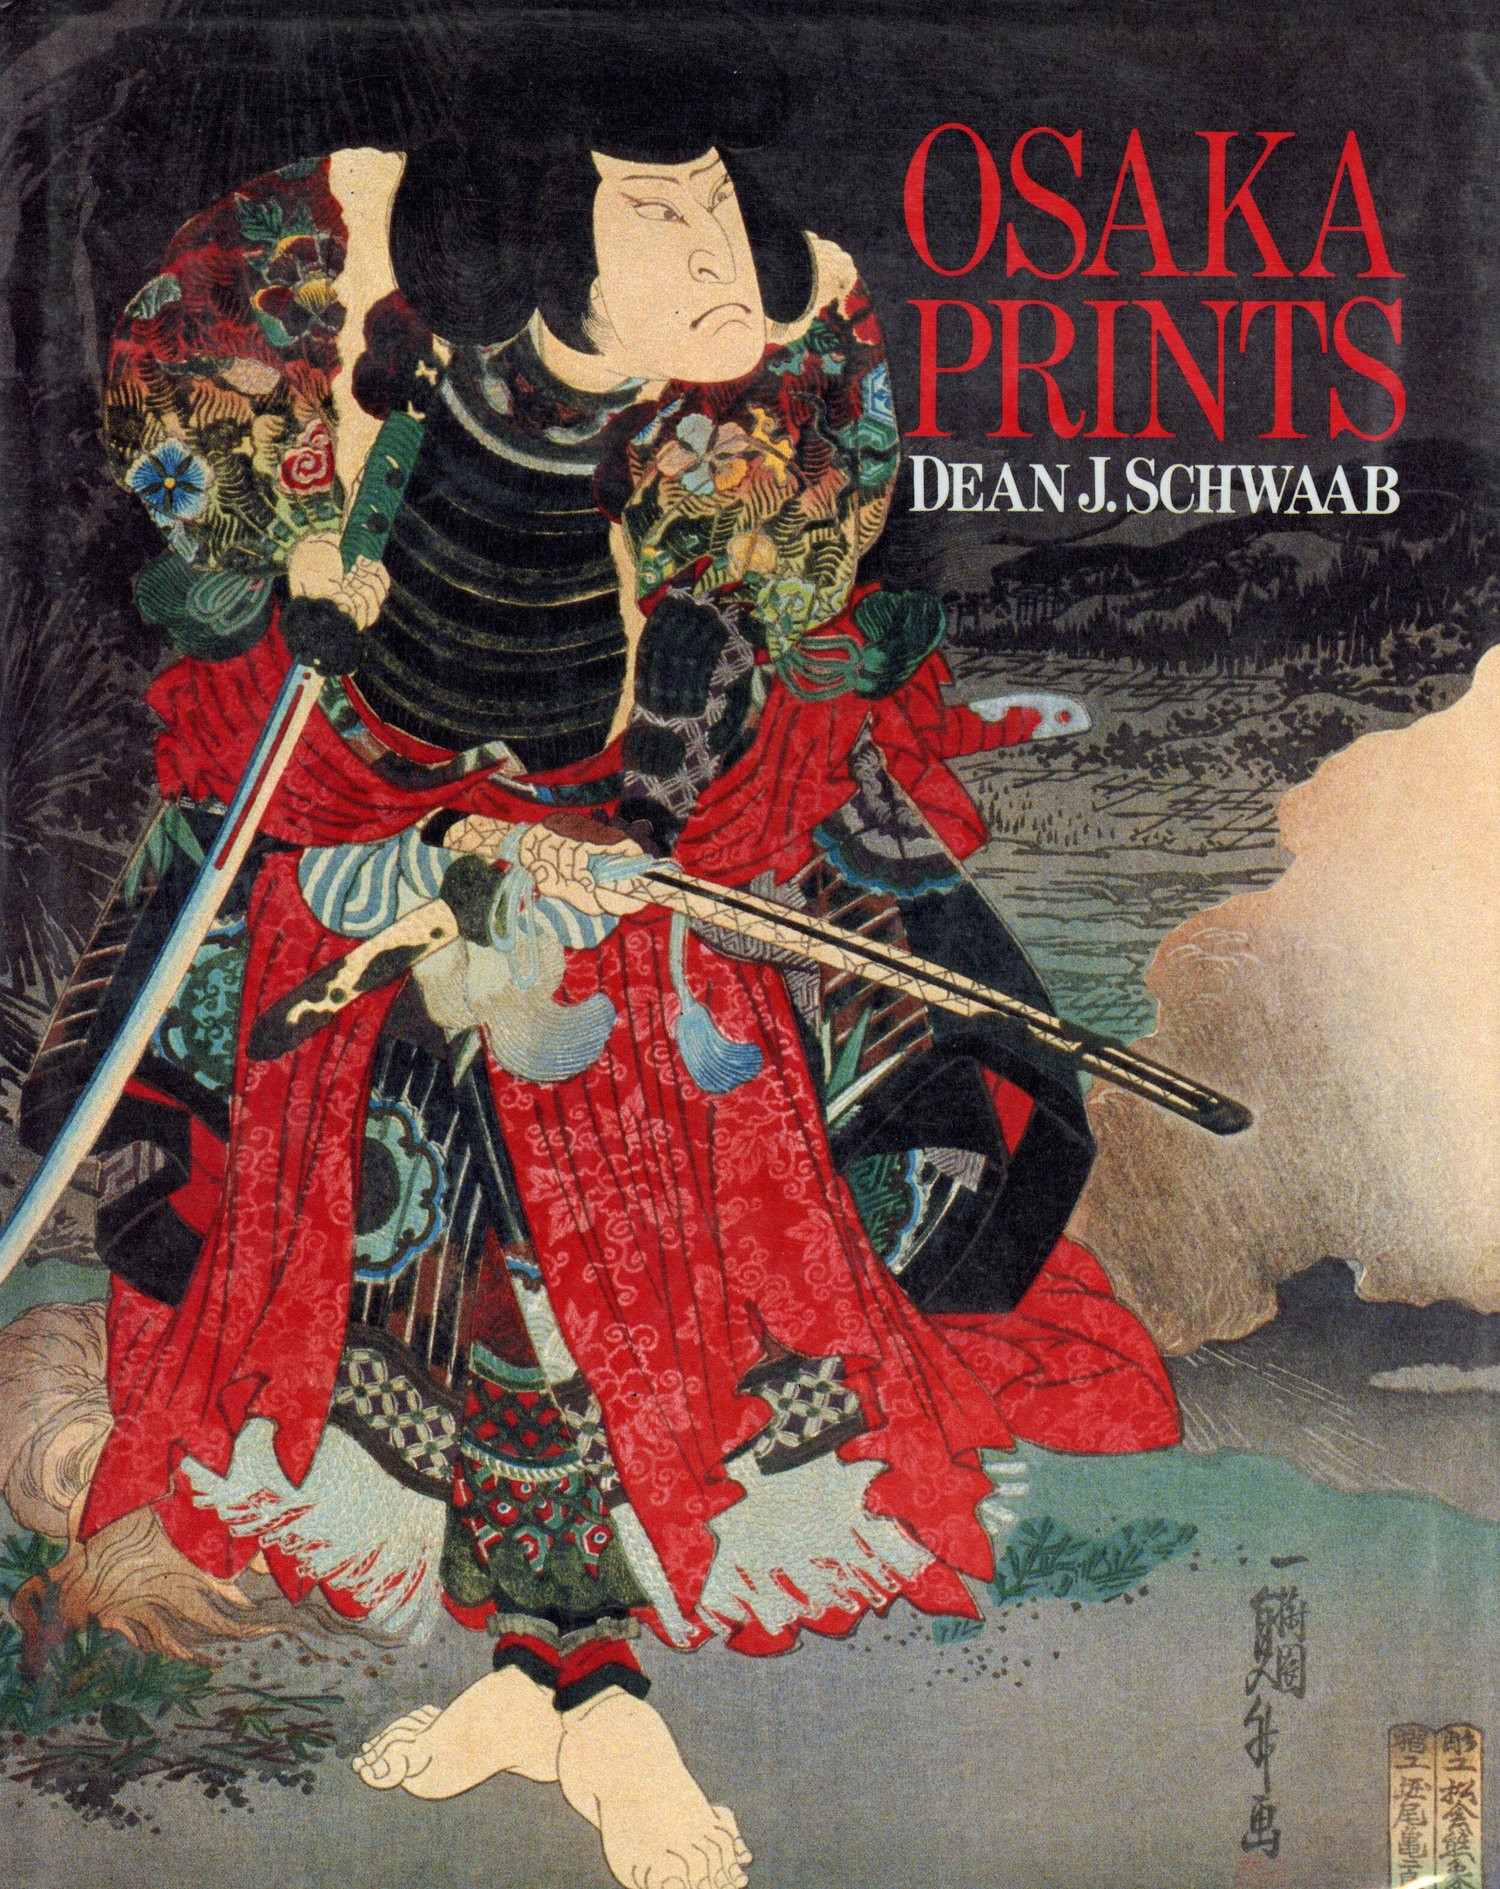 Bookstore — COLLECTING JAPANESE PRINTS